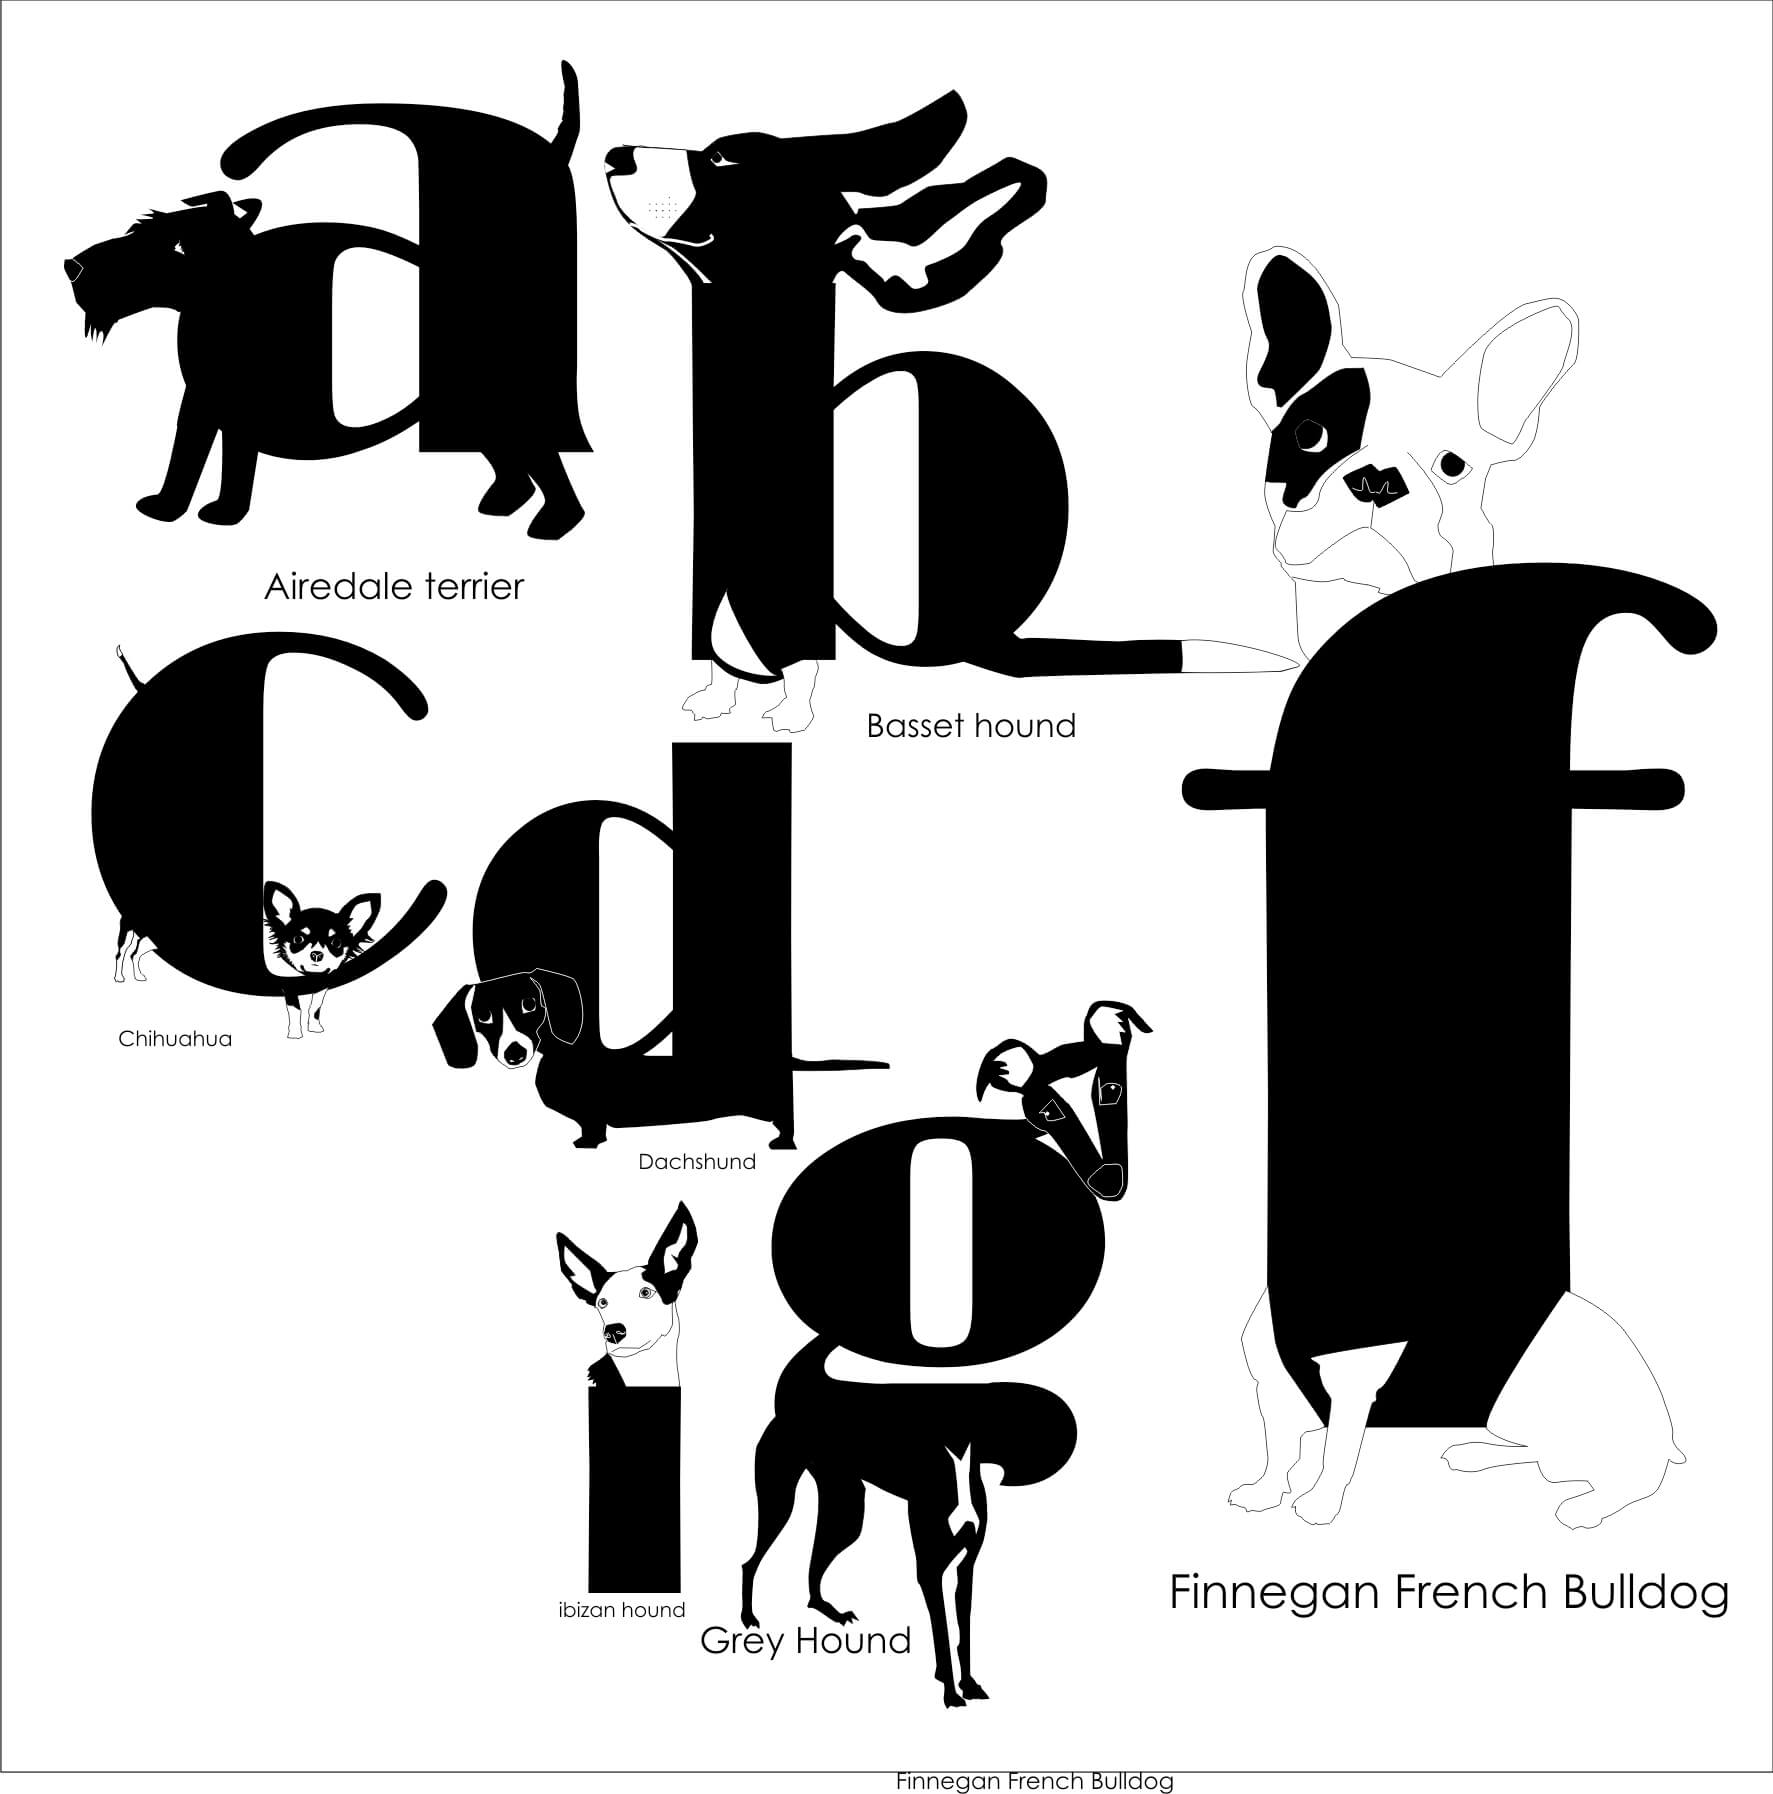 Download Free Dogs Fonts